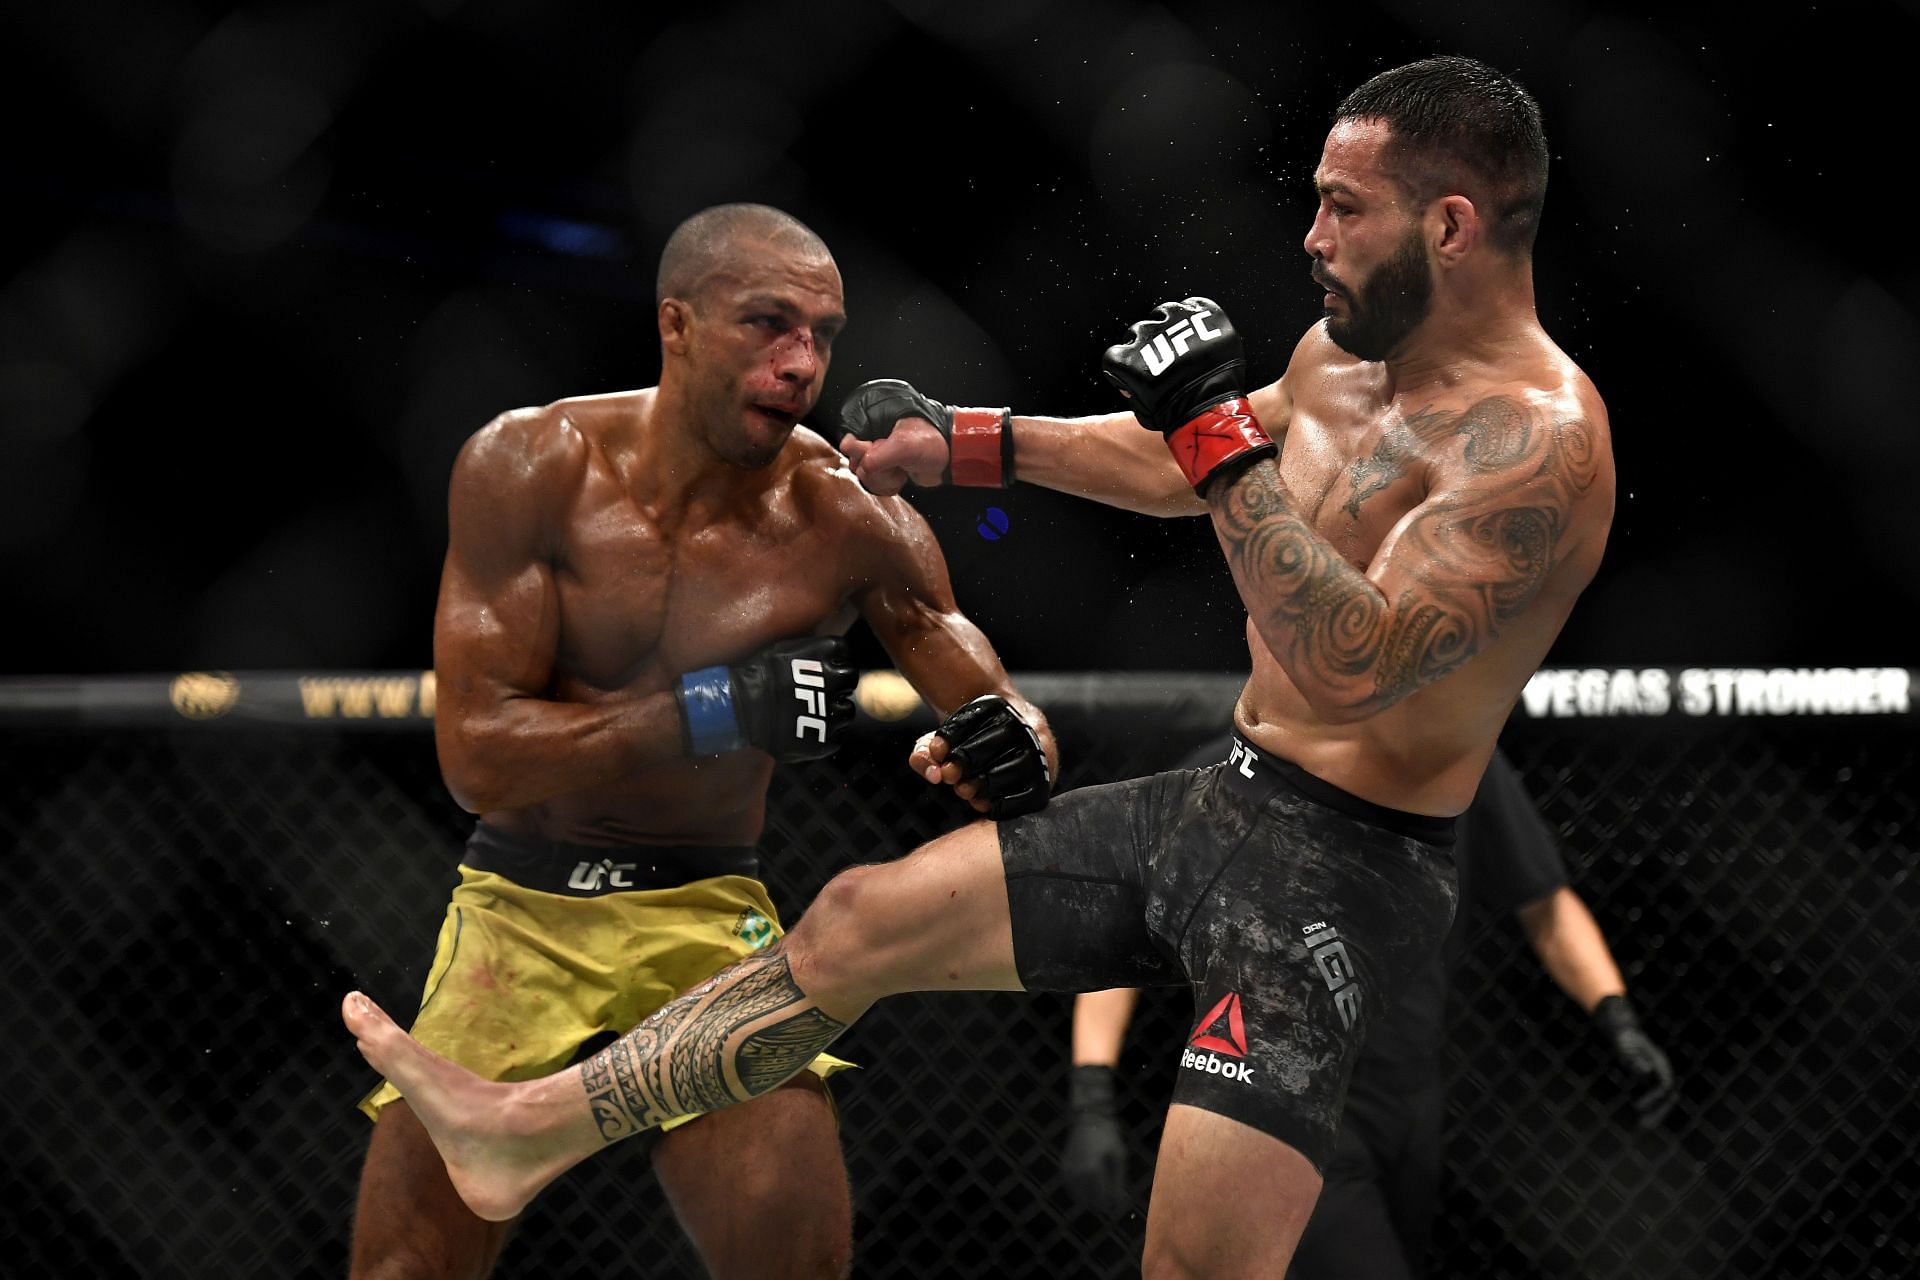 Edson Barboza will be hoping to thrill fight fans again this weekend